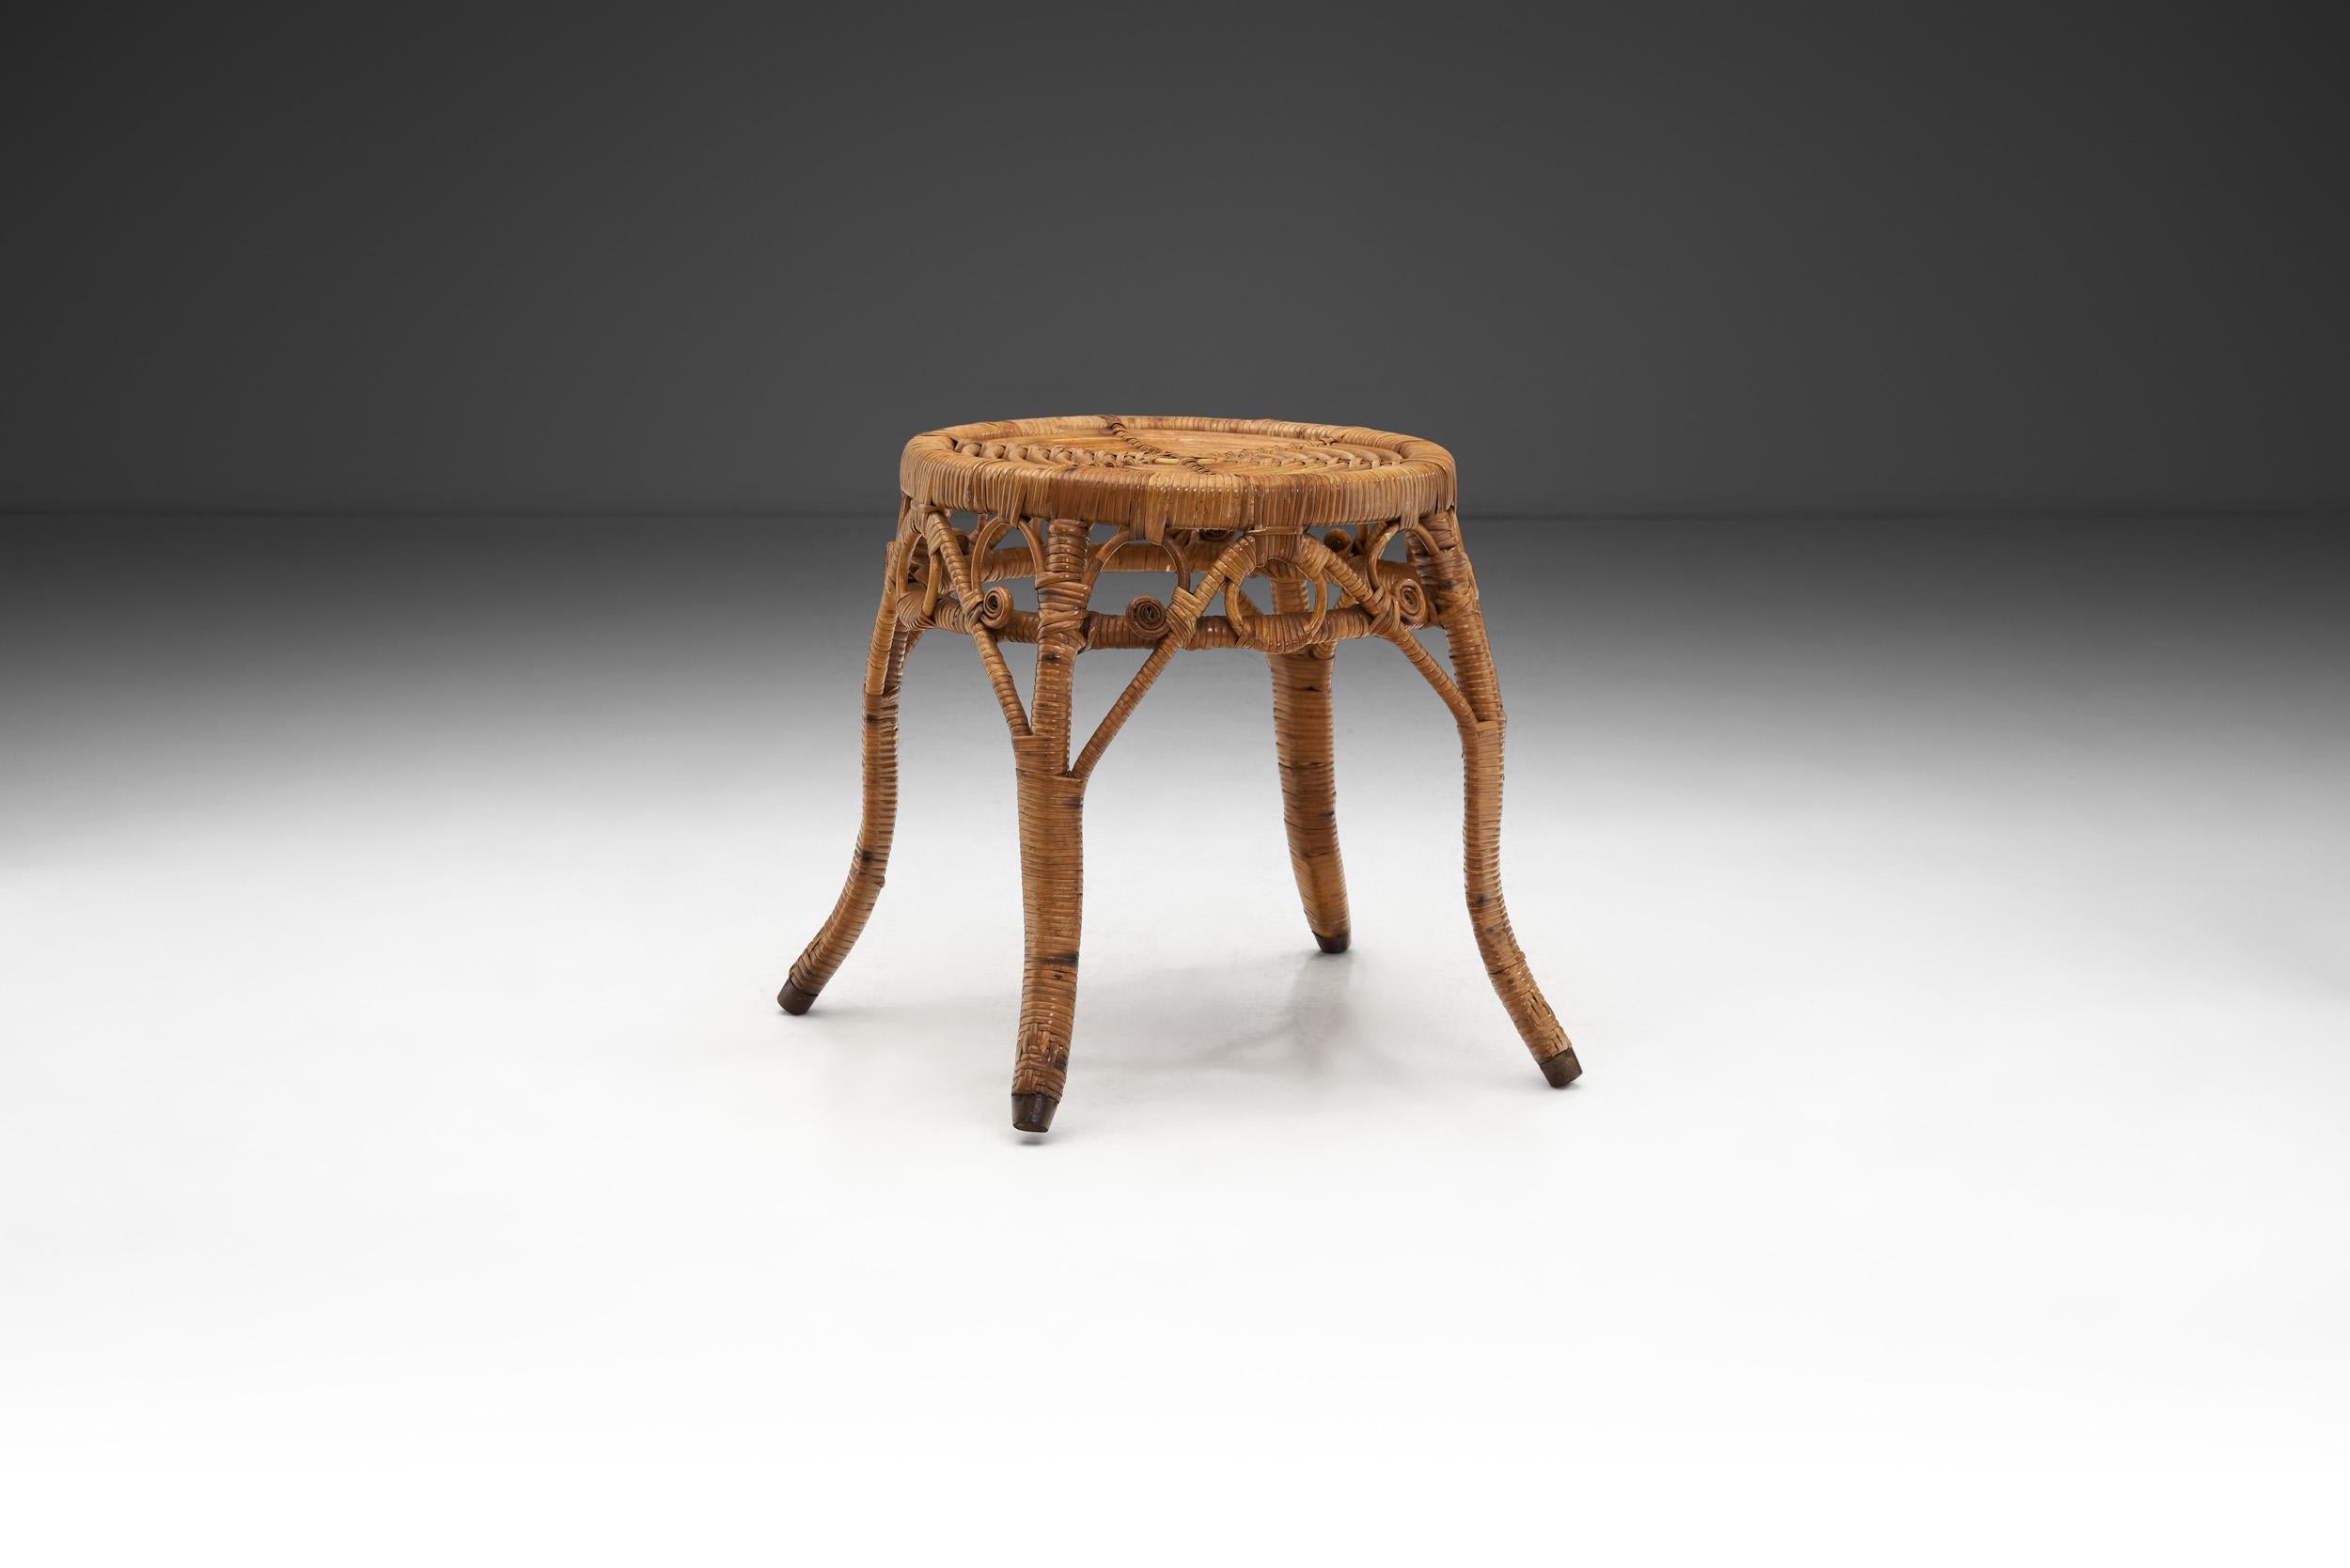 Mid-Century Modern Woven Rattan Stool, Europe Early 20th Century For Sale